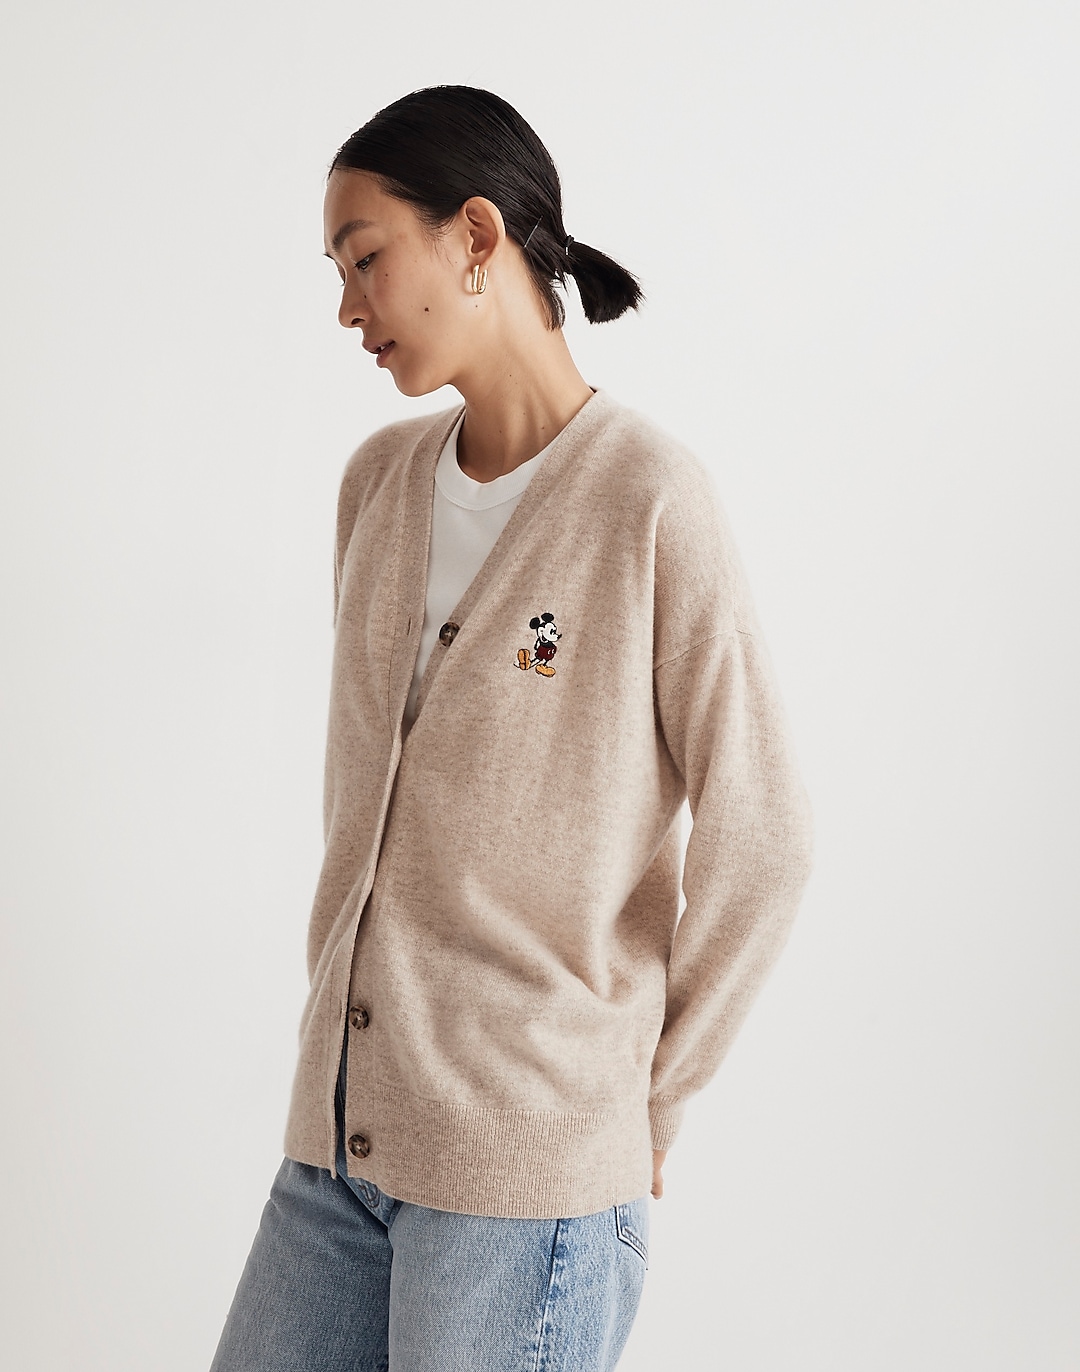 Disney Mickey Mouse-Embroidered Cardigan Sweater in (Re)sponsible Cashmere | Madewell